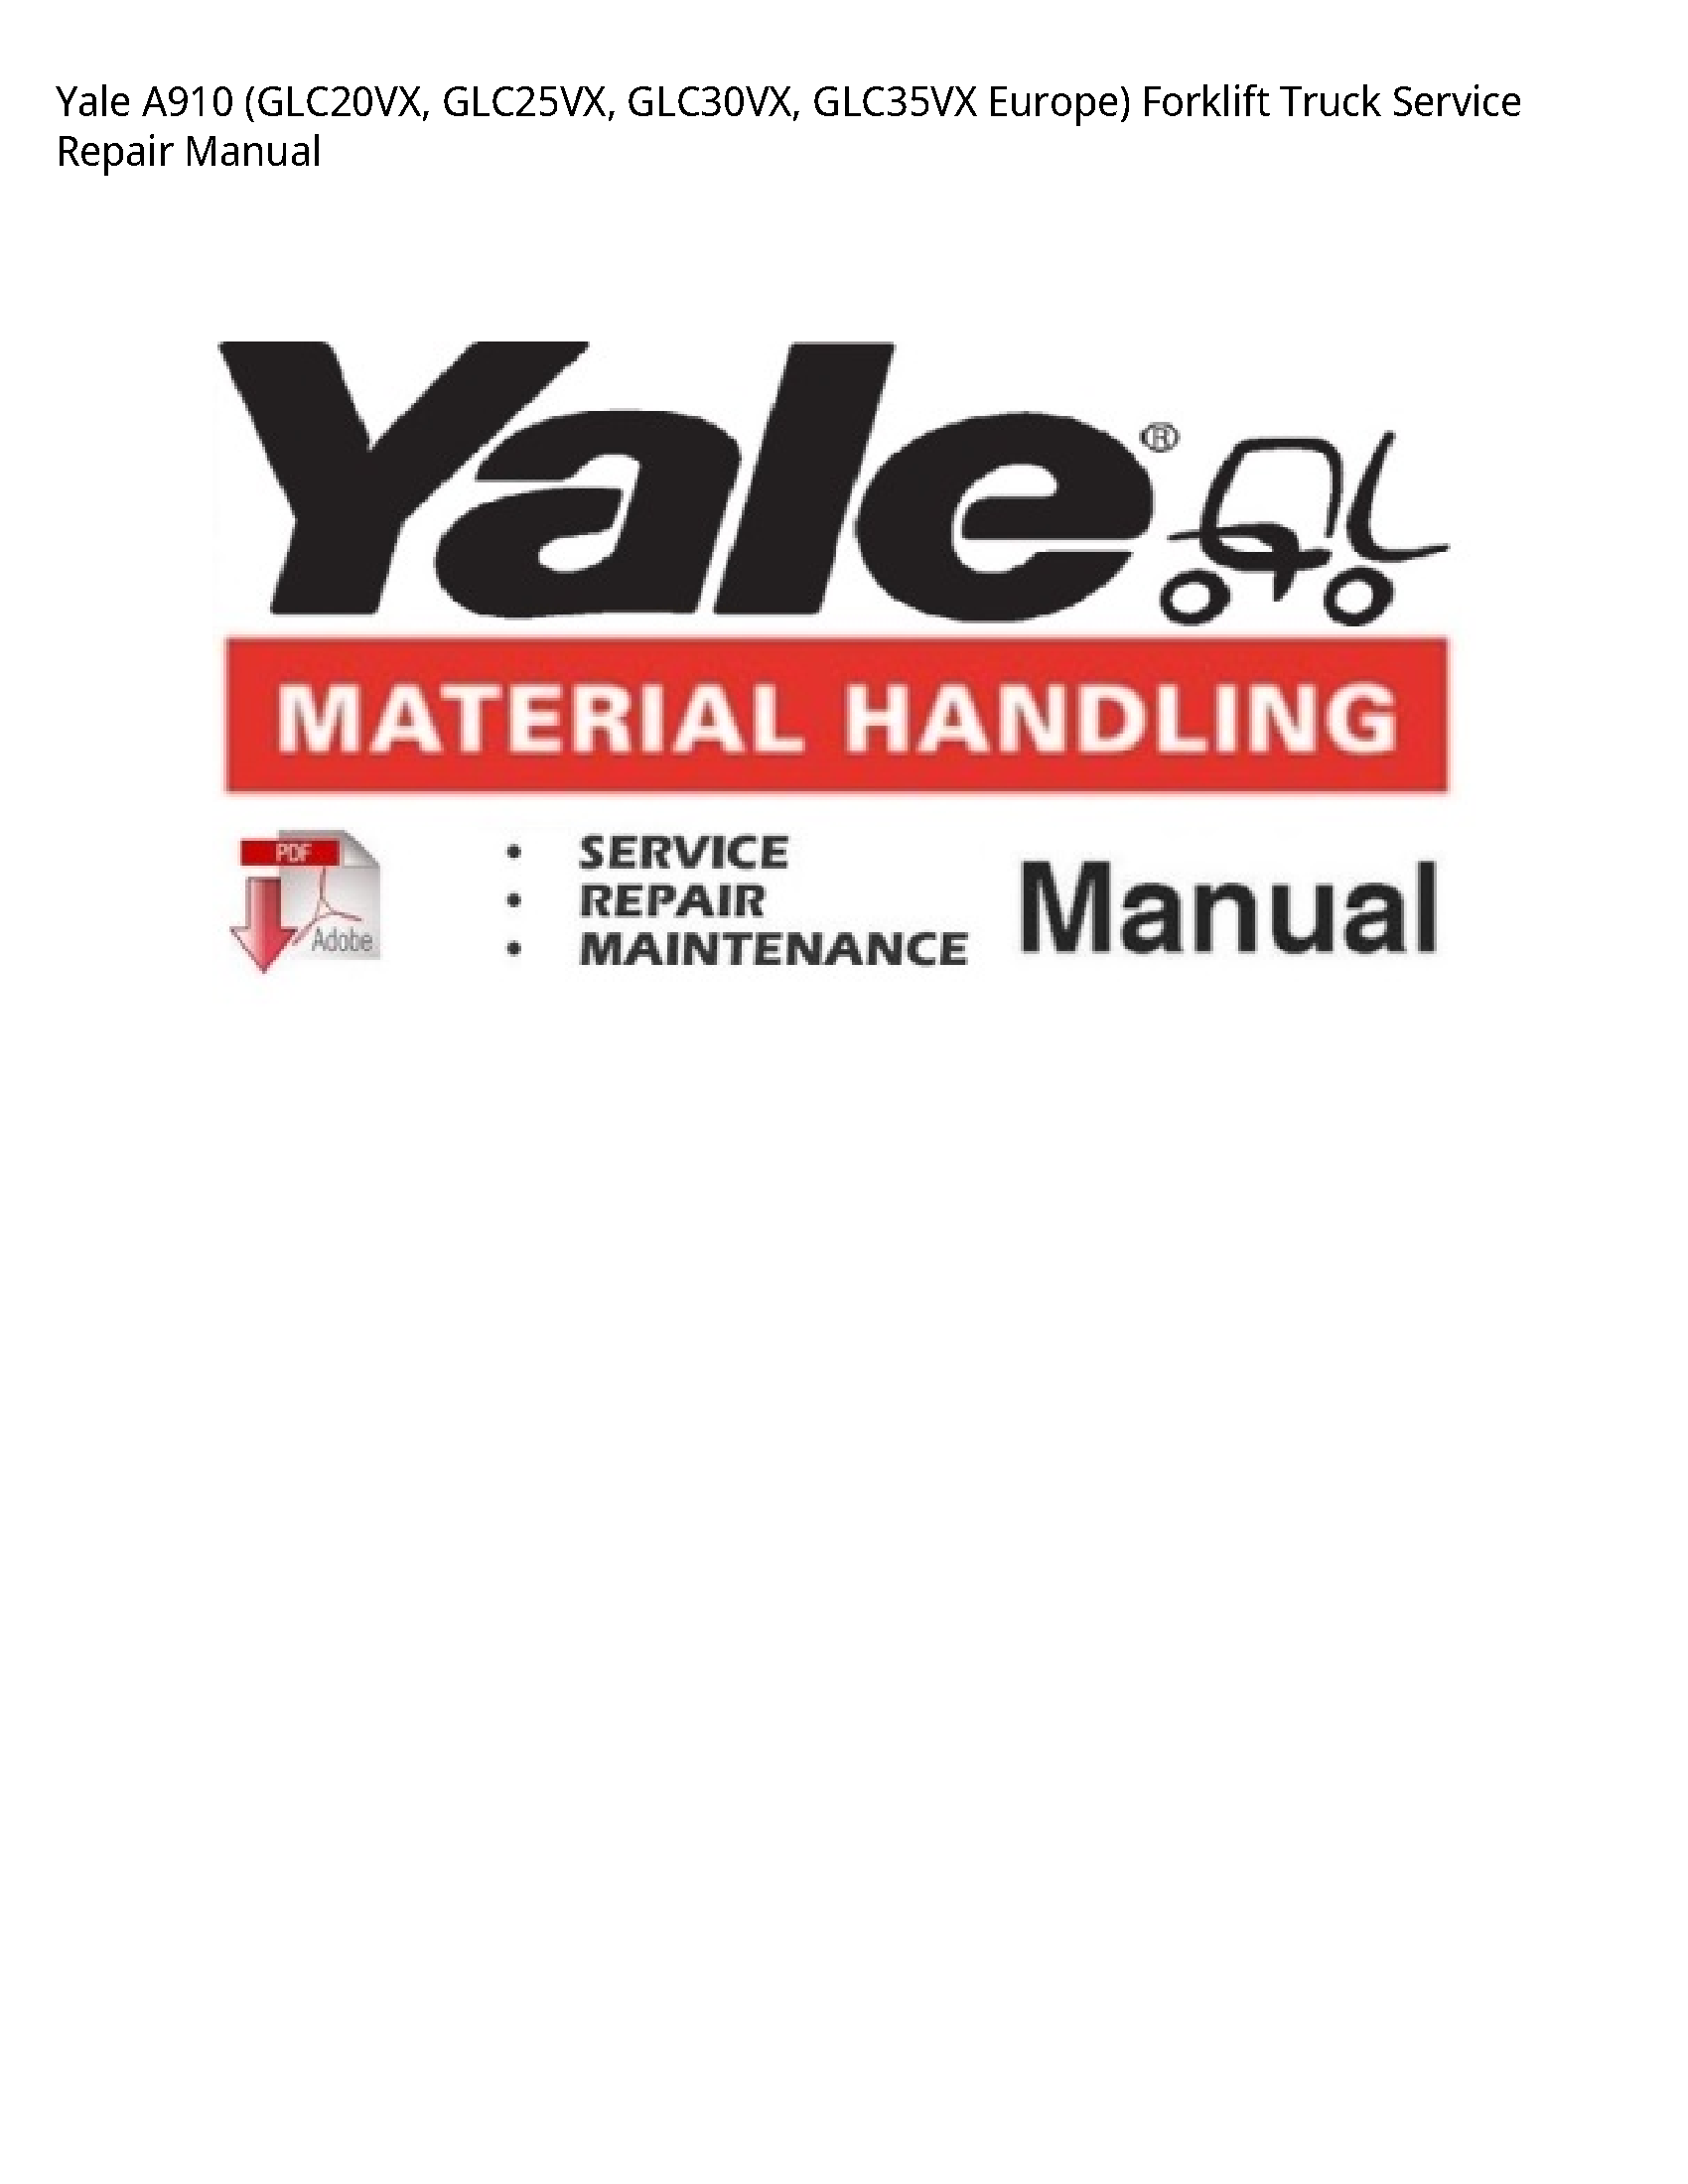 Yale A910 Europe) Forklift Truck manual